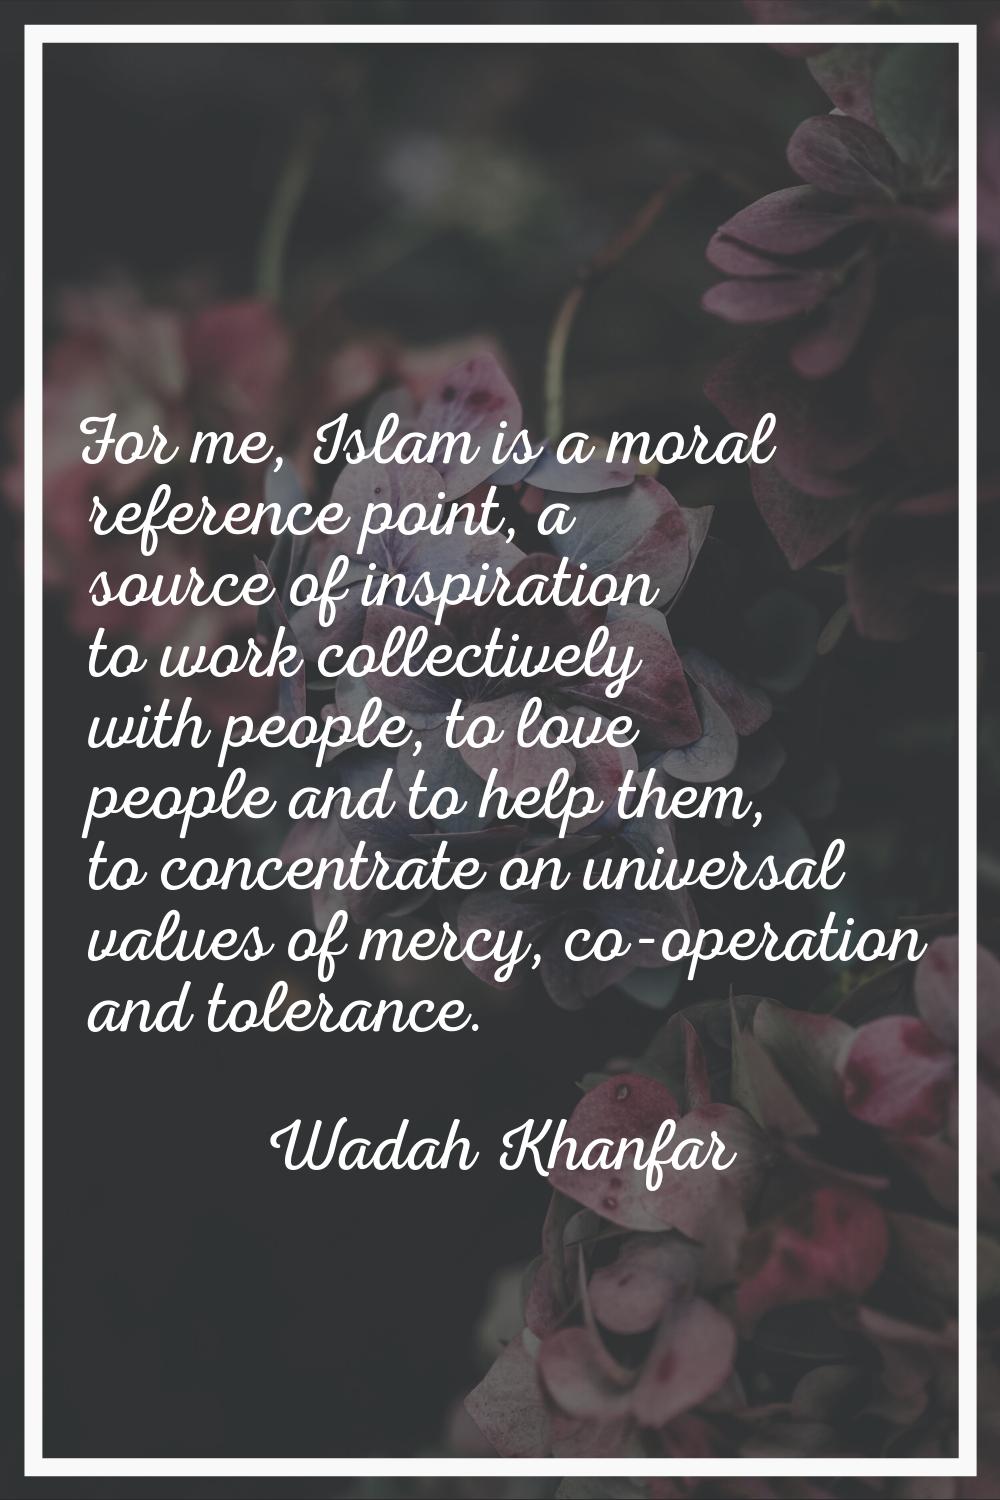 For me, Islam is a moral reference point, a source of inspiration to work collectively with people,